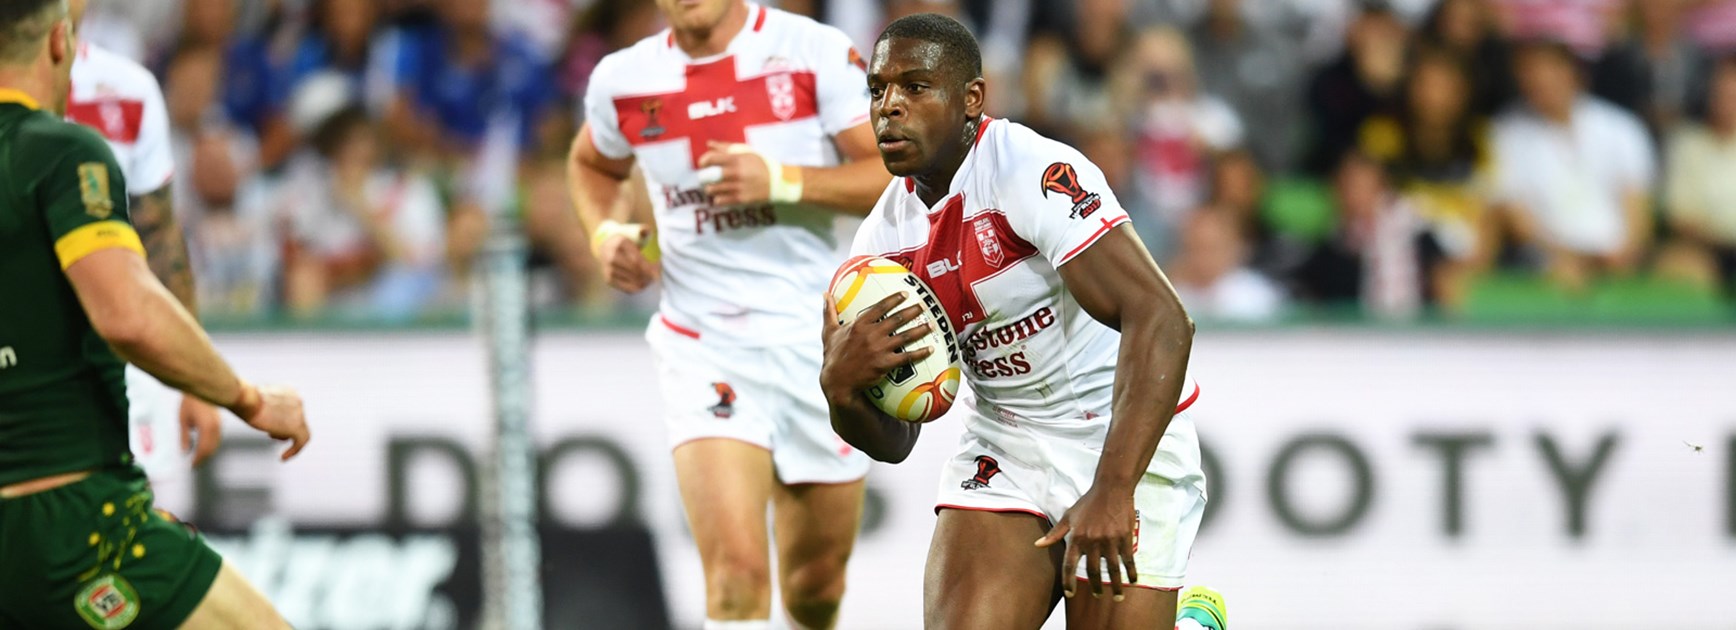 England's McGillvary on song for final